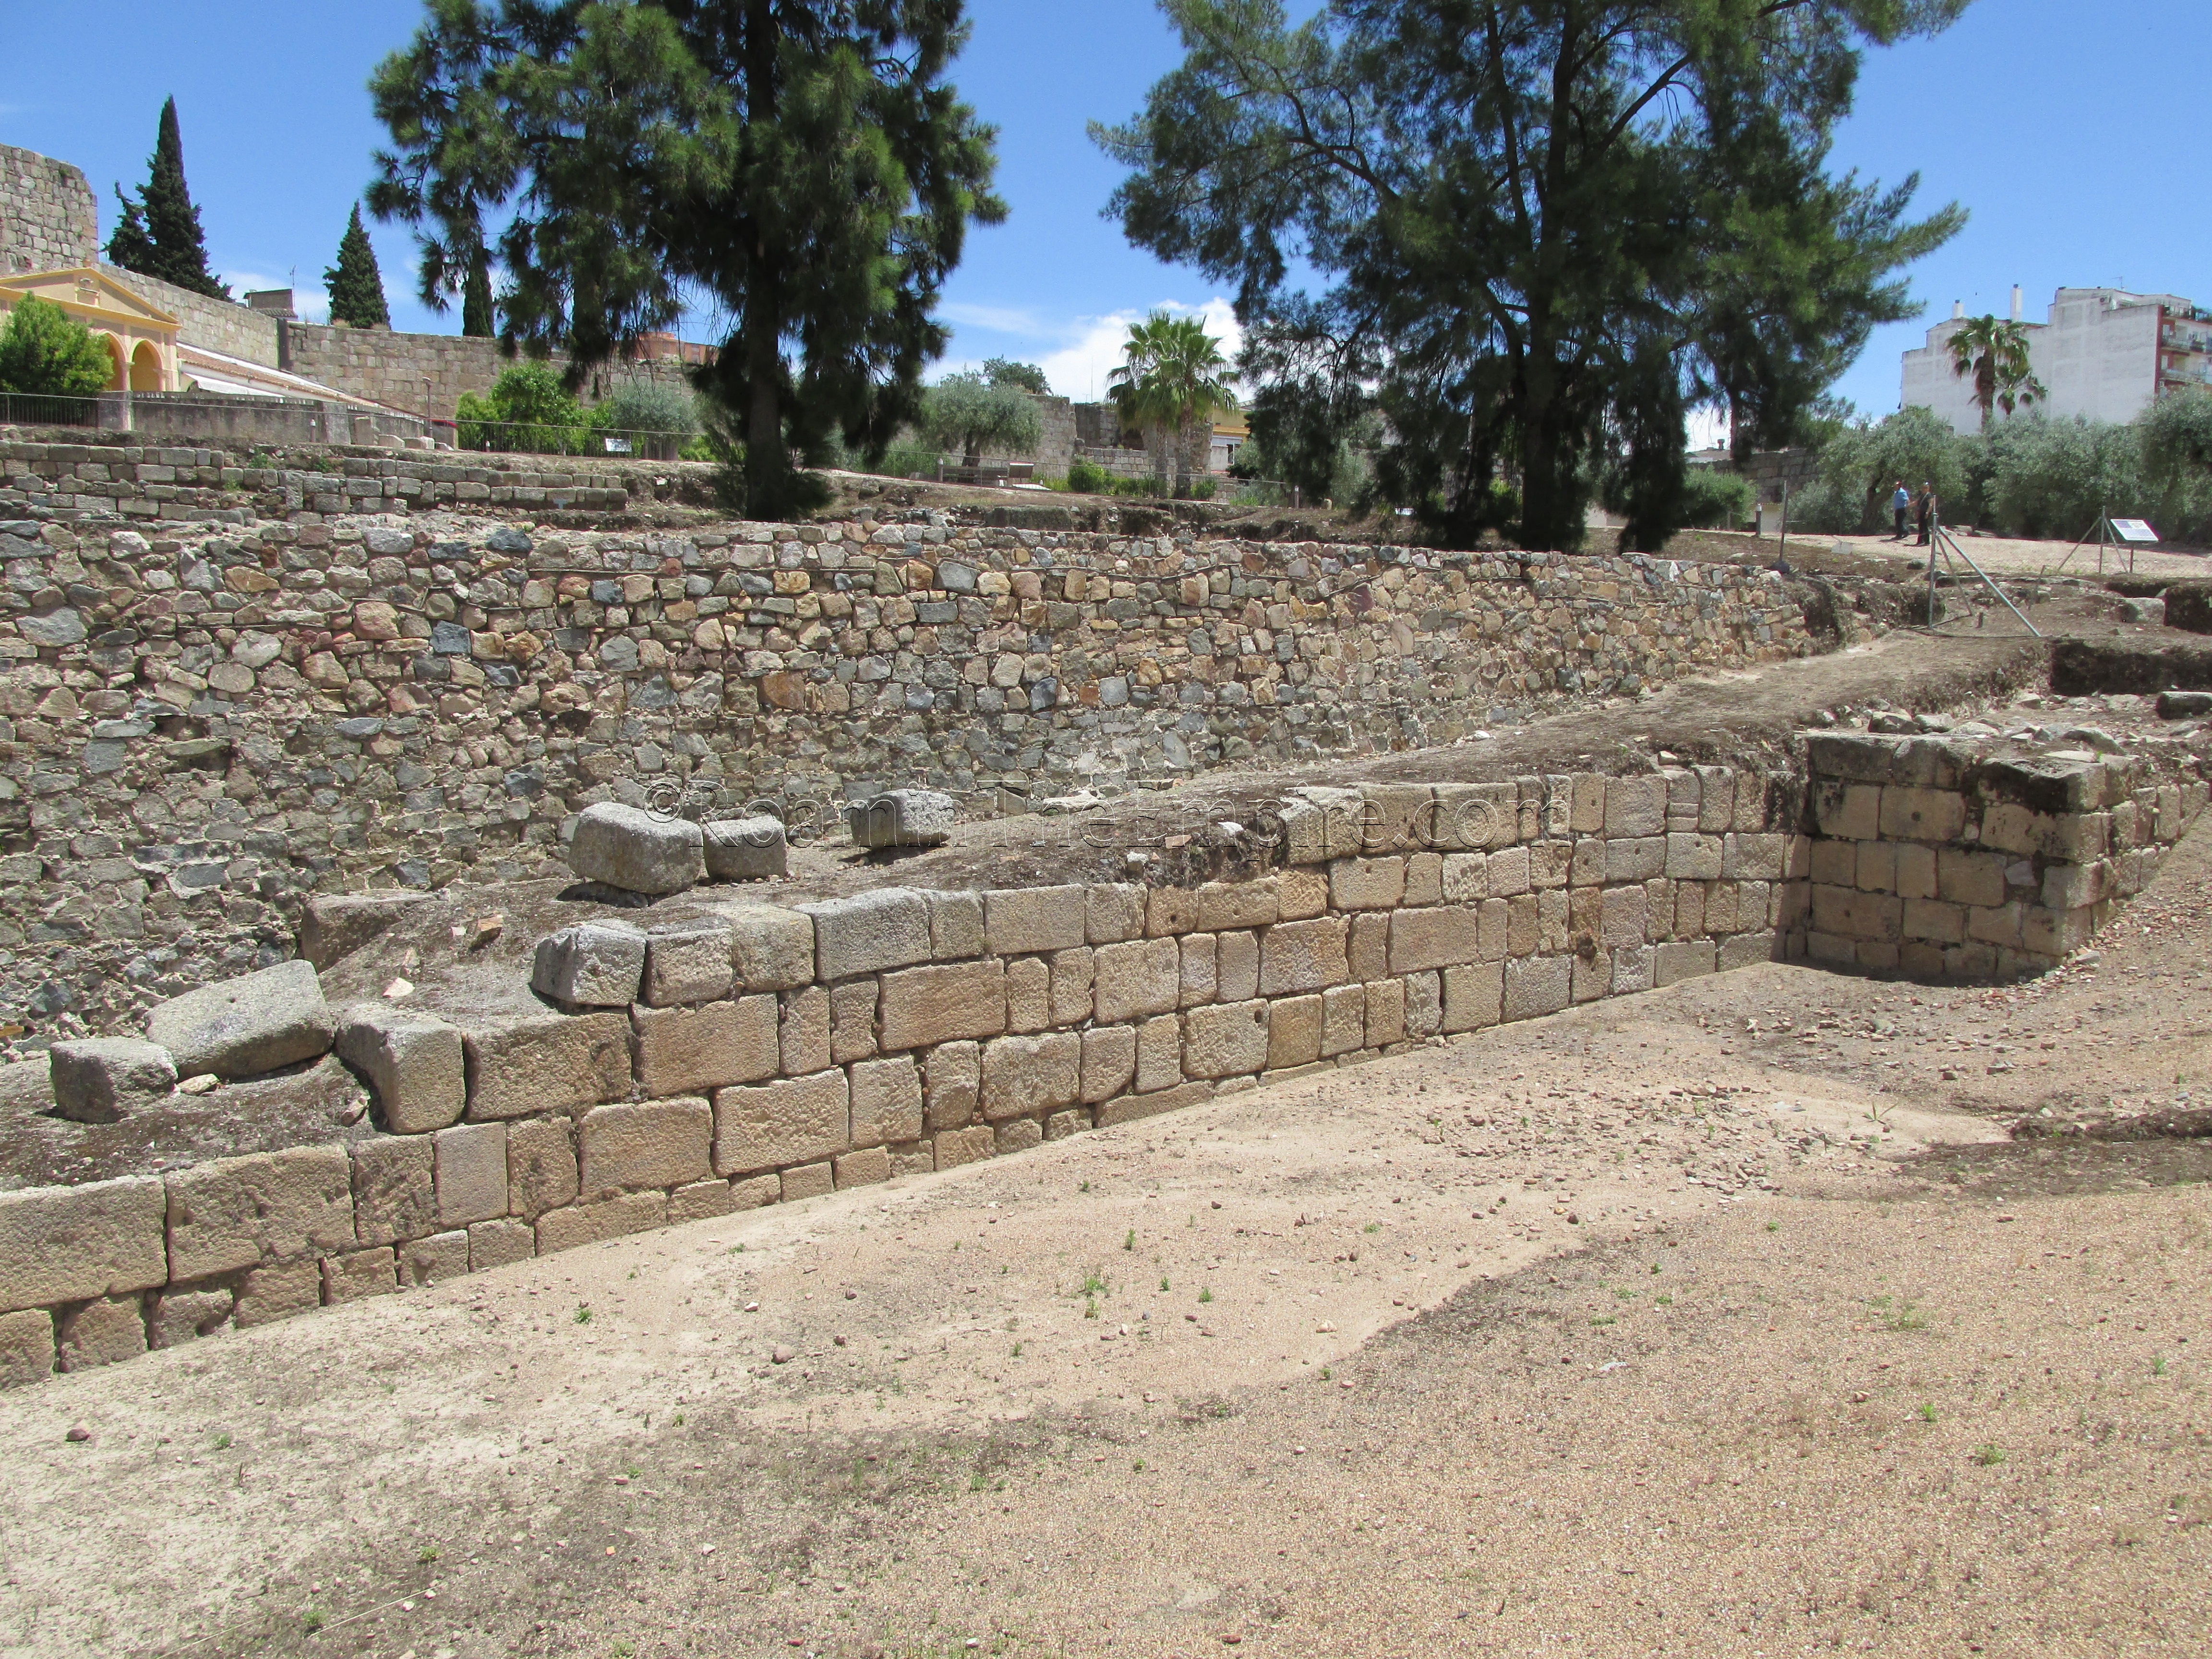 Roman wall with two building phases clearly visible.